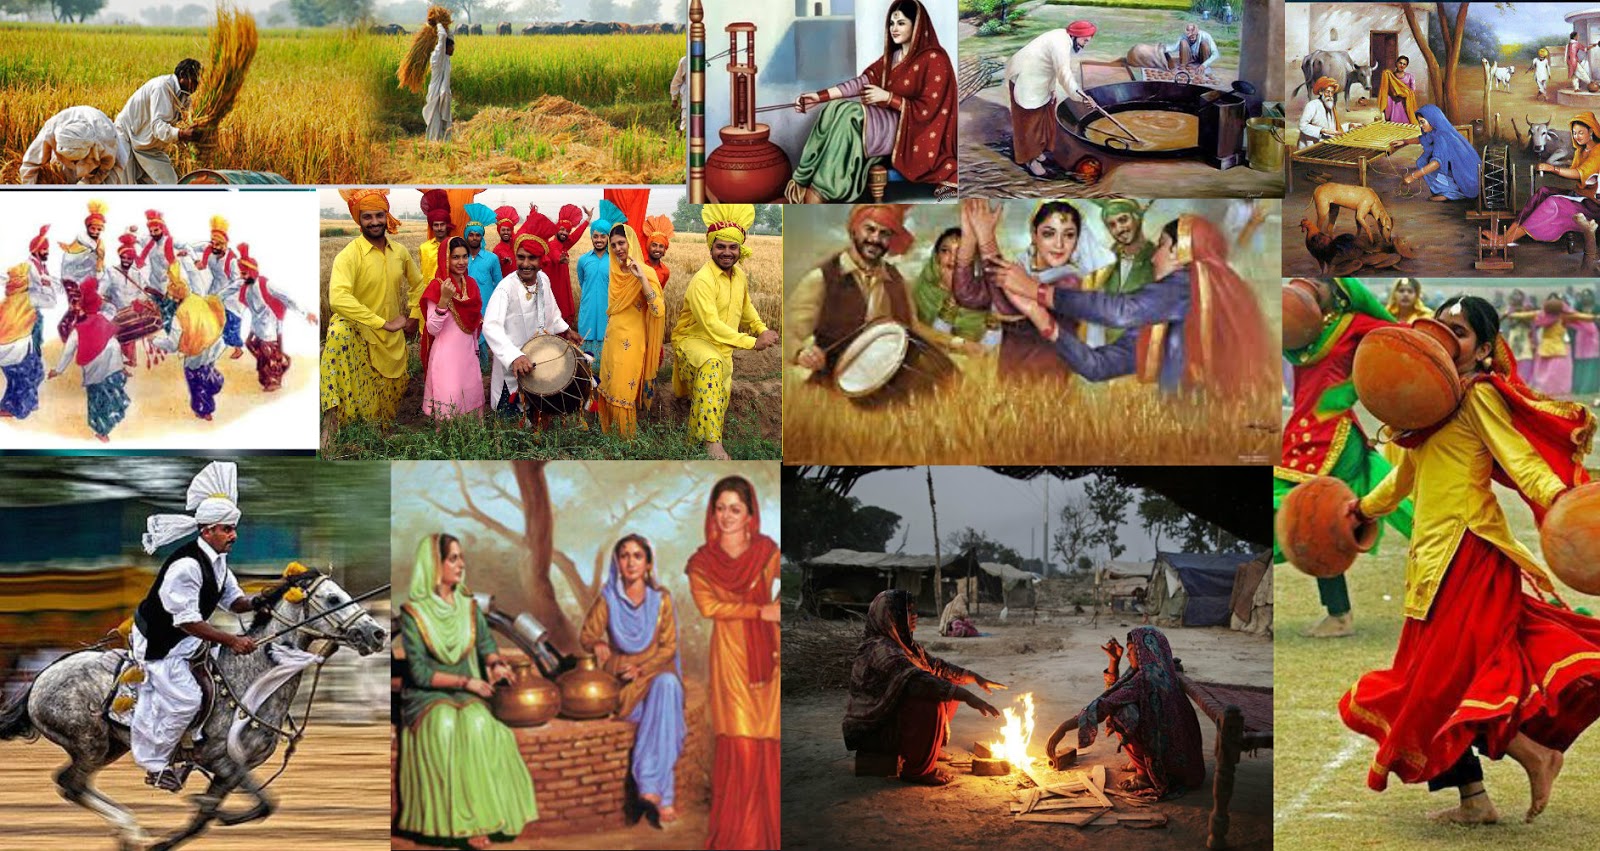 Punjabi culture is one of the oldest in world history